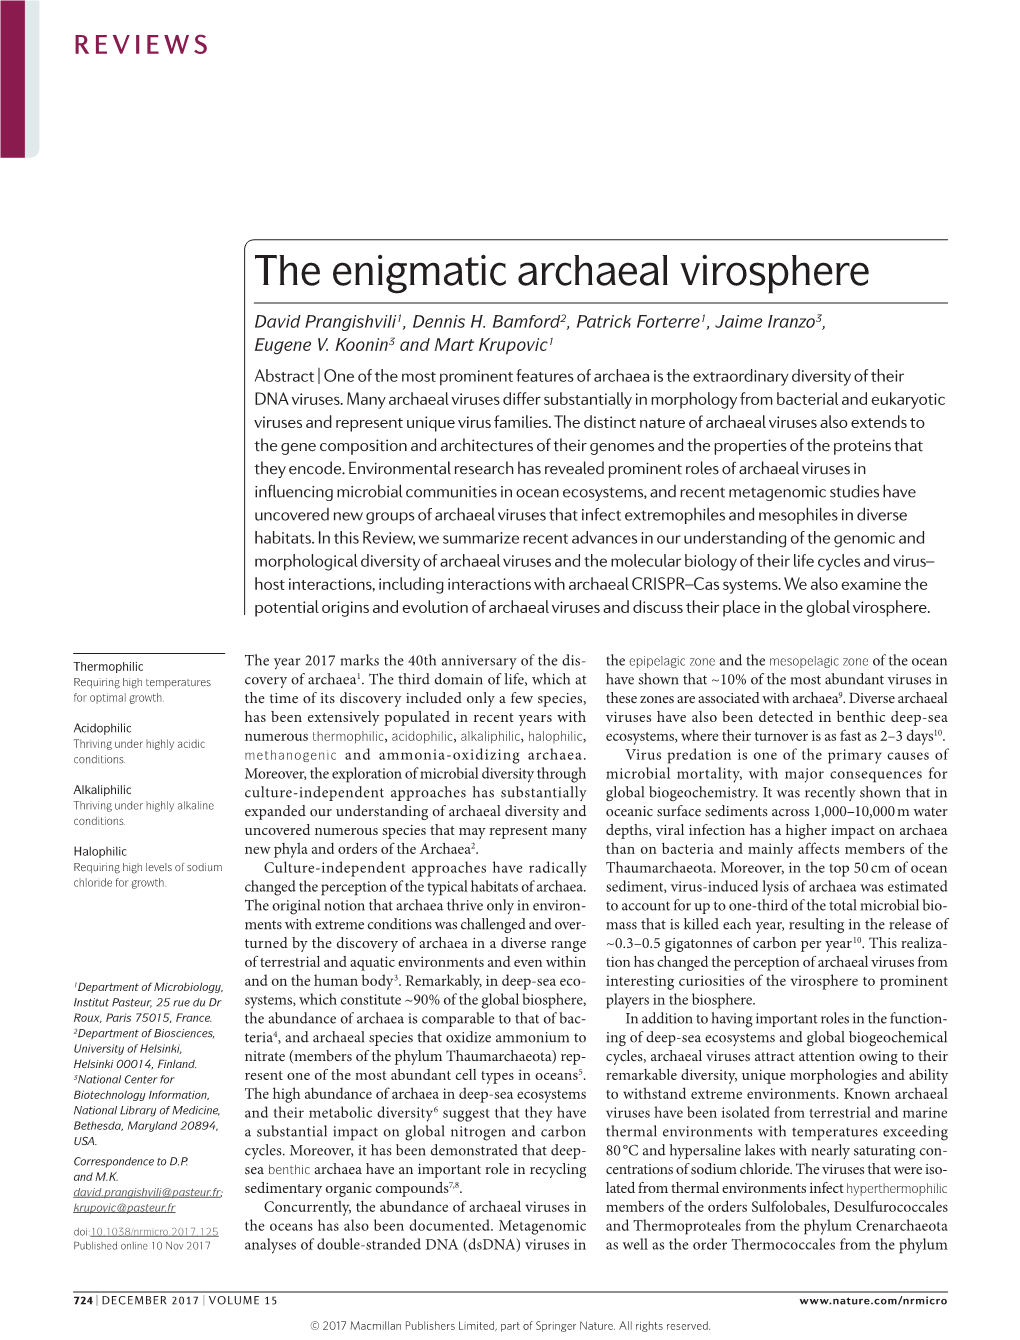 The Enigmatic Archaeal Virosphere